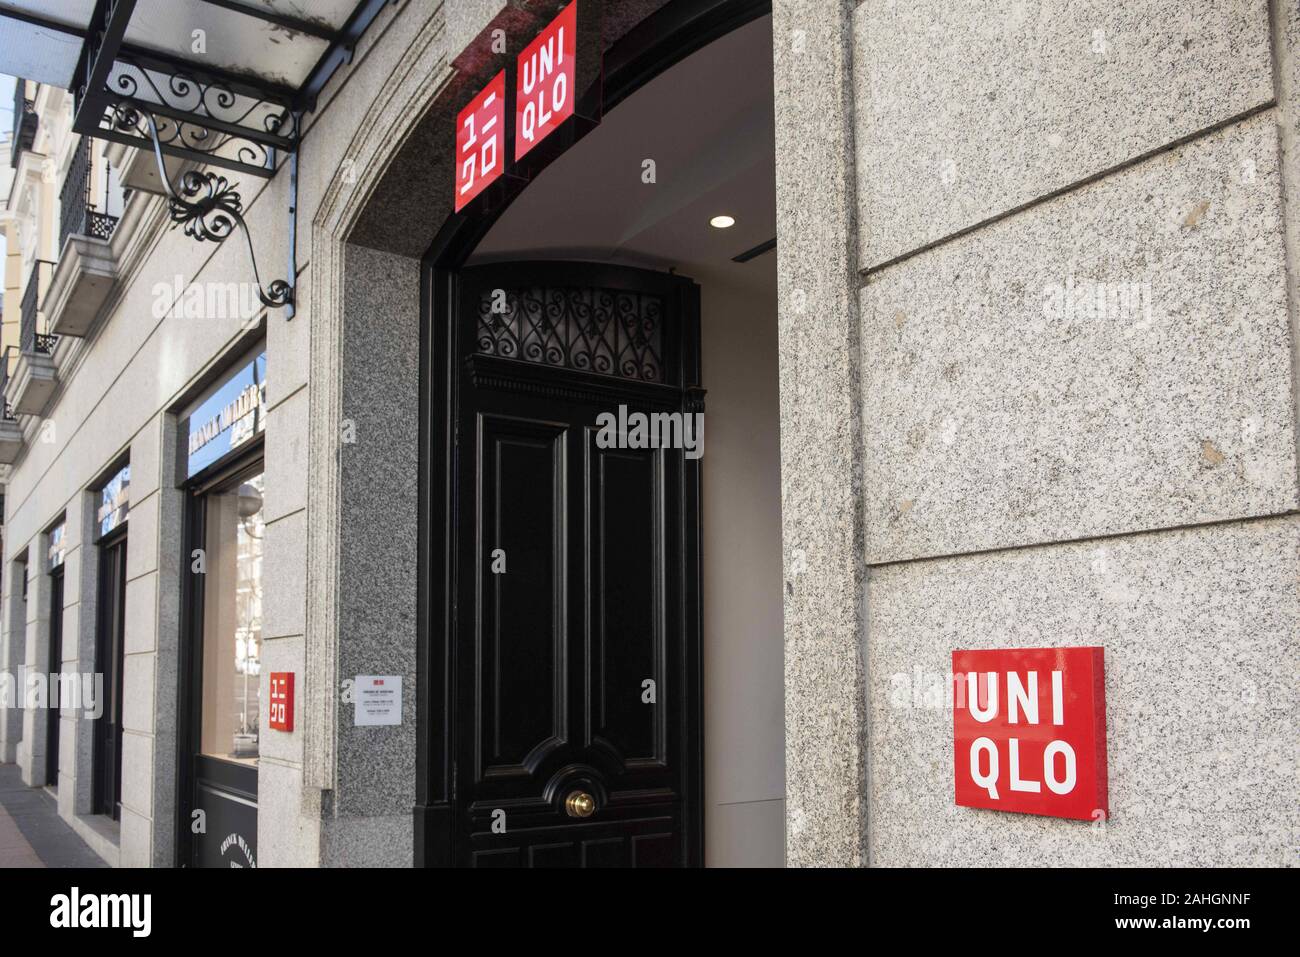 Spain. 28th Dec, 2019. Japanese clothing brand Uniqlo logo and store in  Madrid, Spain Credit: Budrul Chukrut/SOPA Images/ZUMA Wire/Alamy Live News  Stock Photo - Alamy